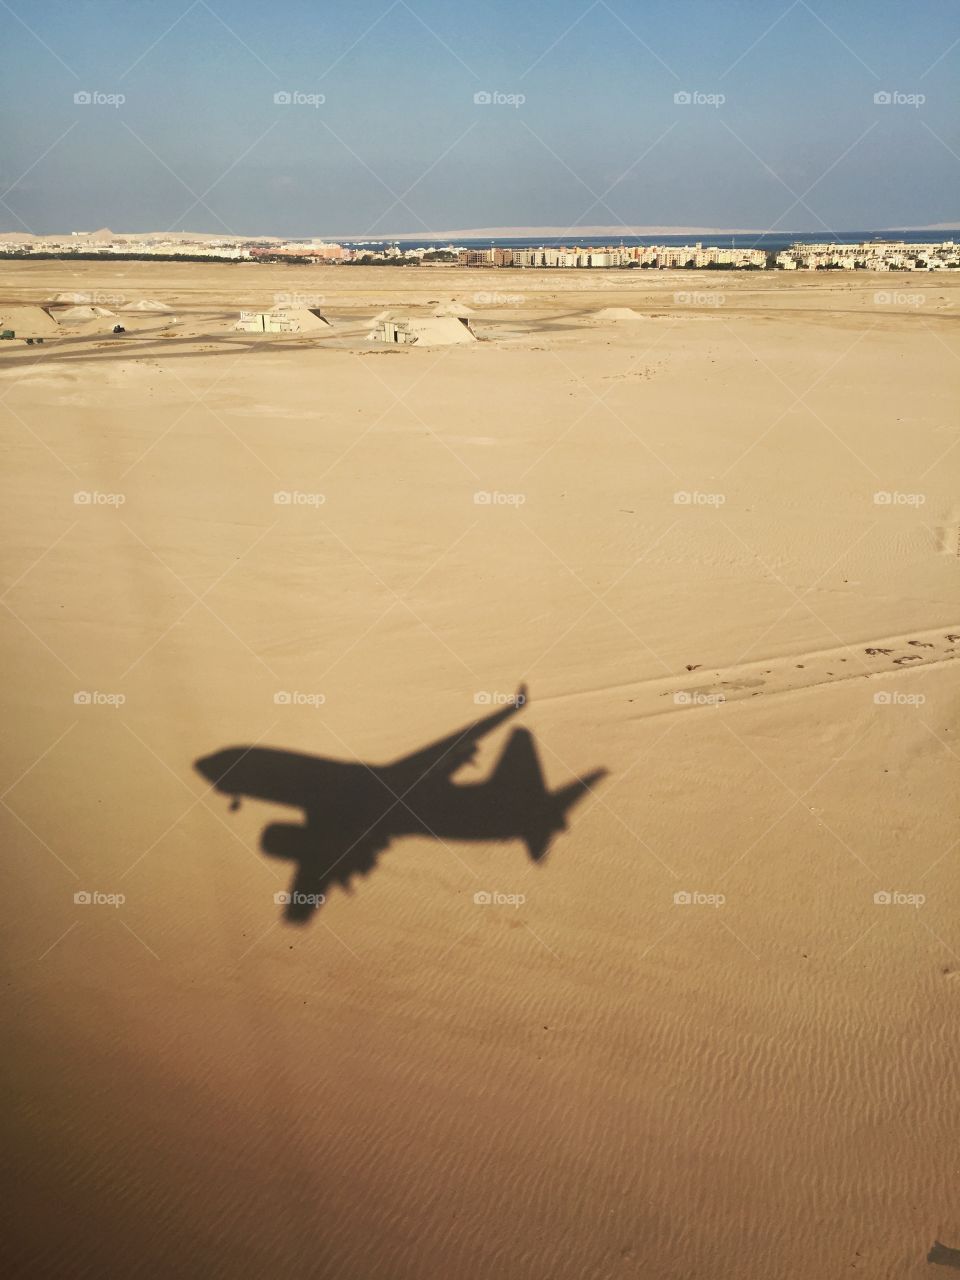 Shadow of flying airplane on the Sand